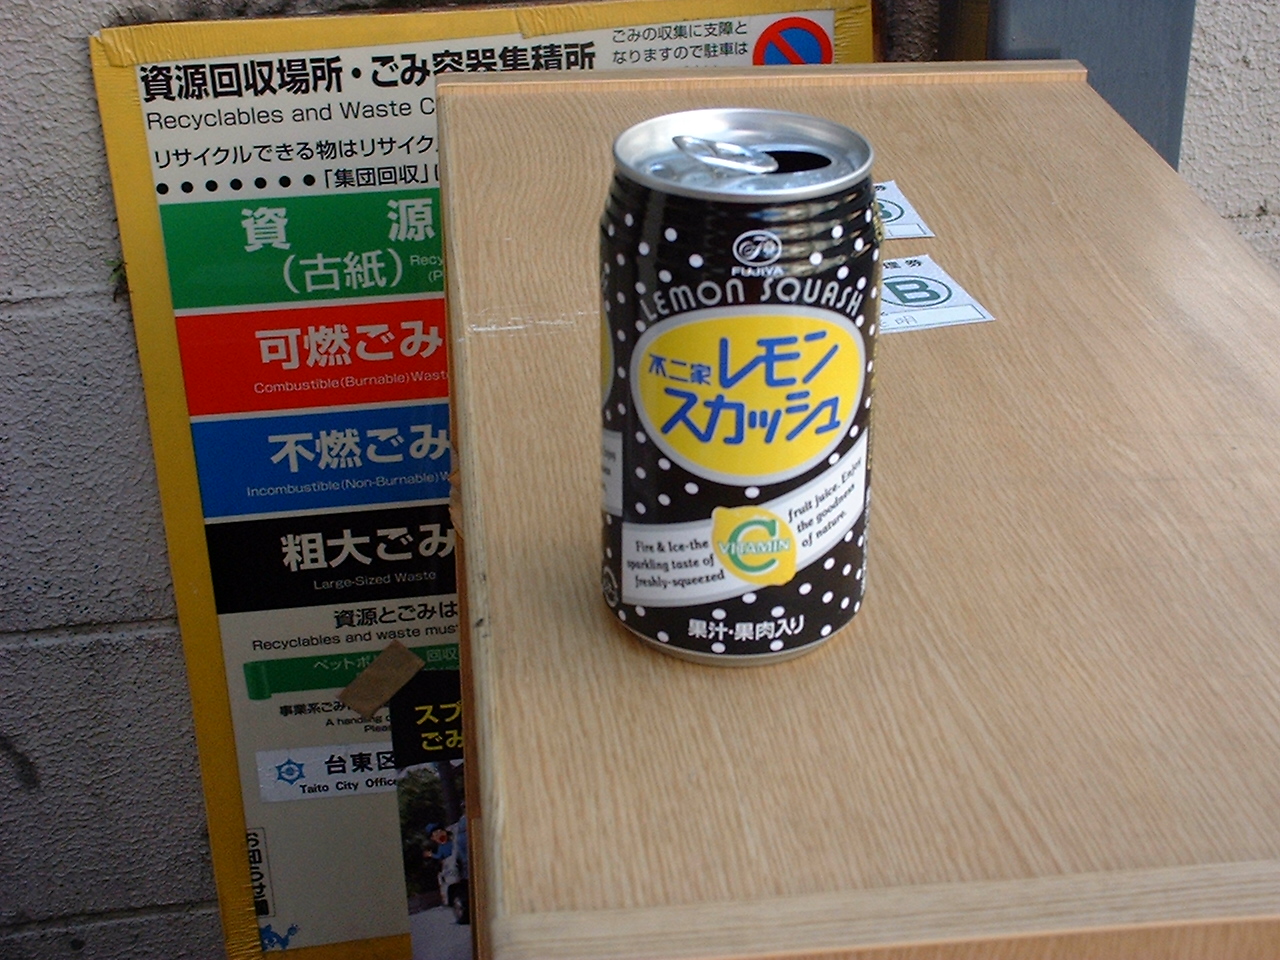 a black soda can with a yellow circle and japanese text